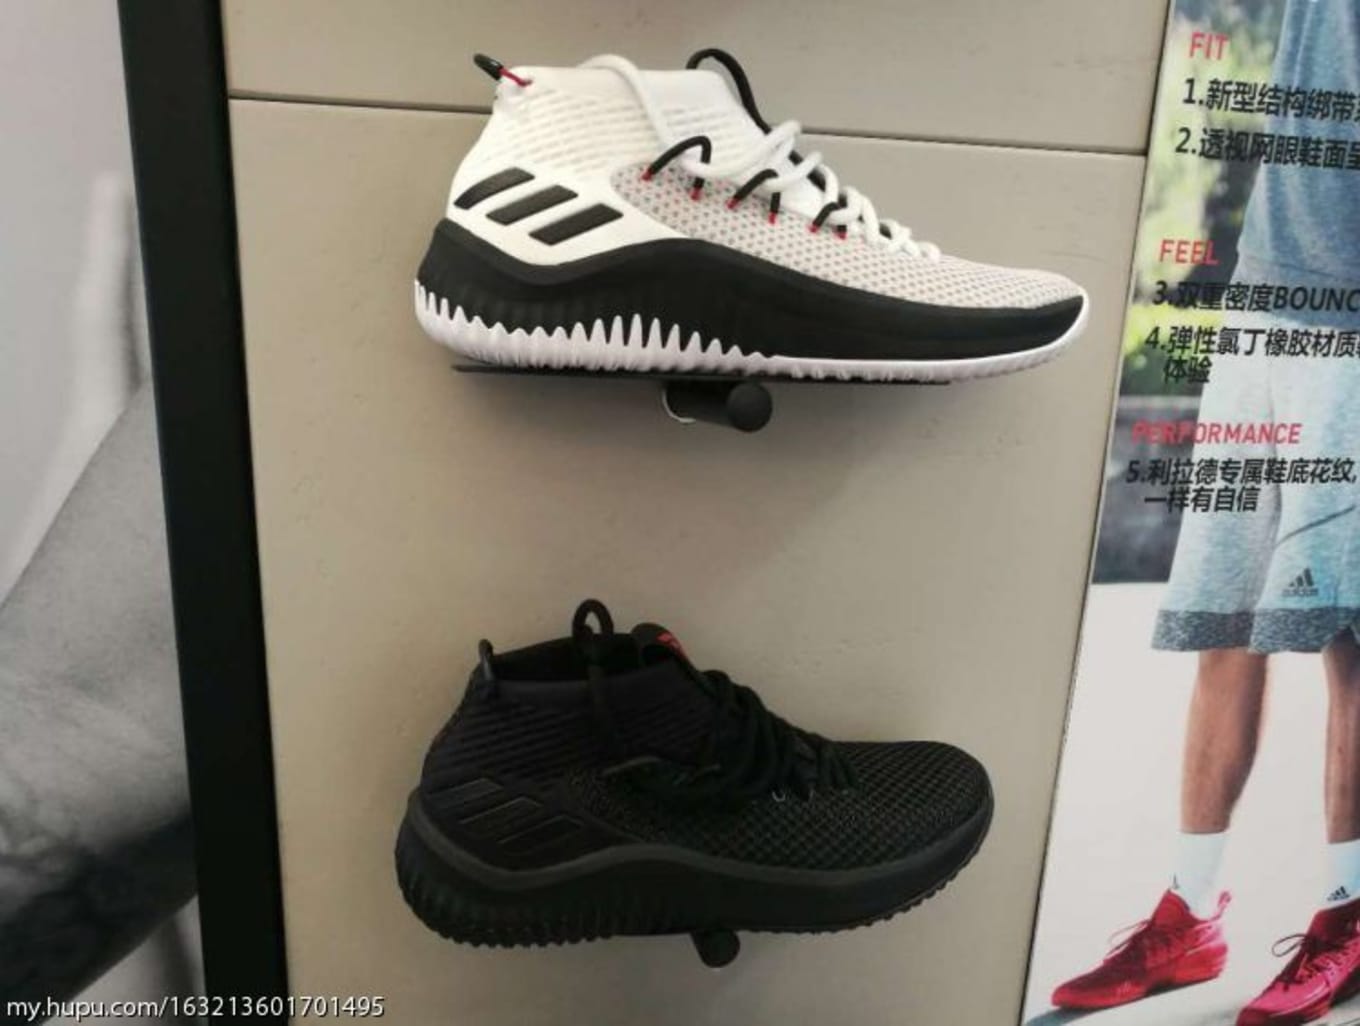 dame 4 release date